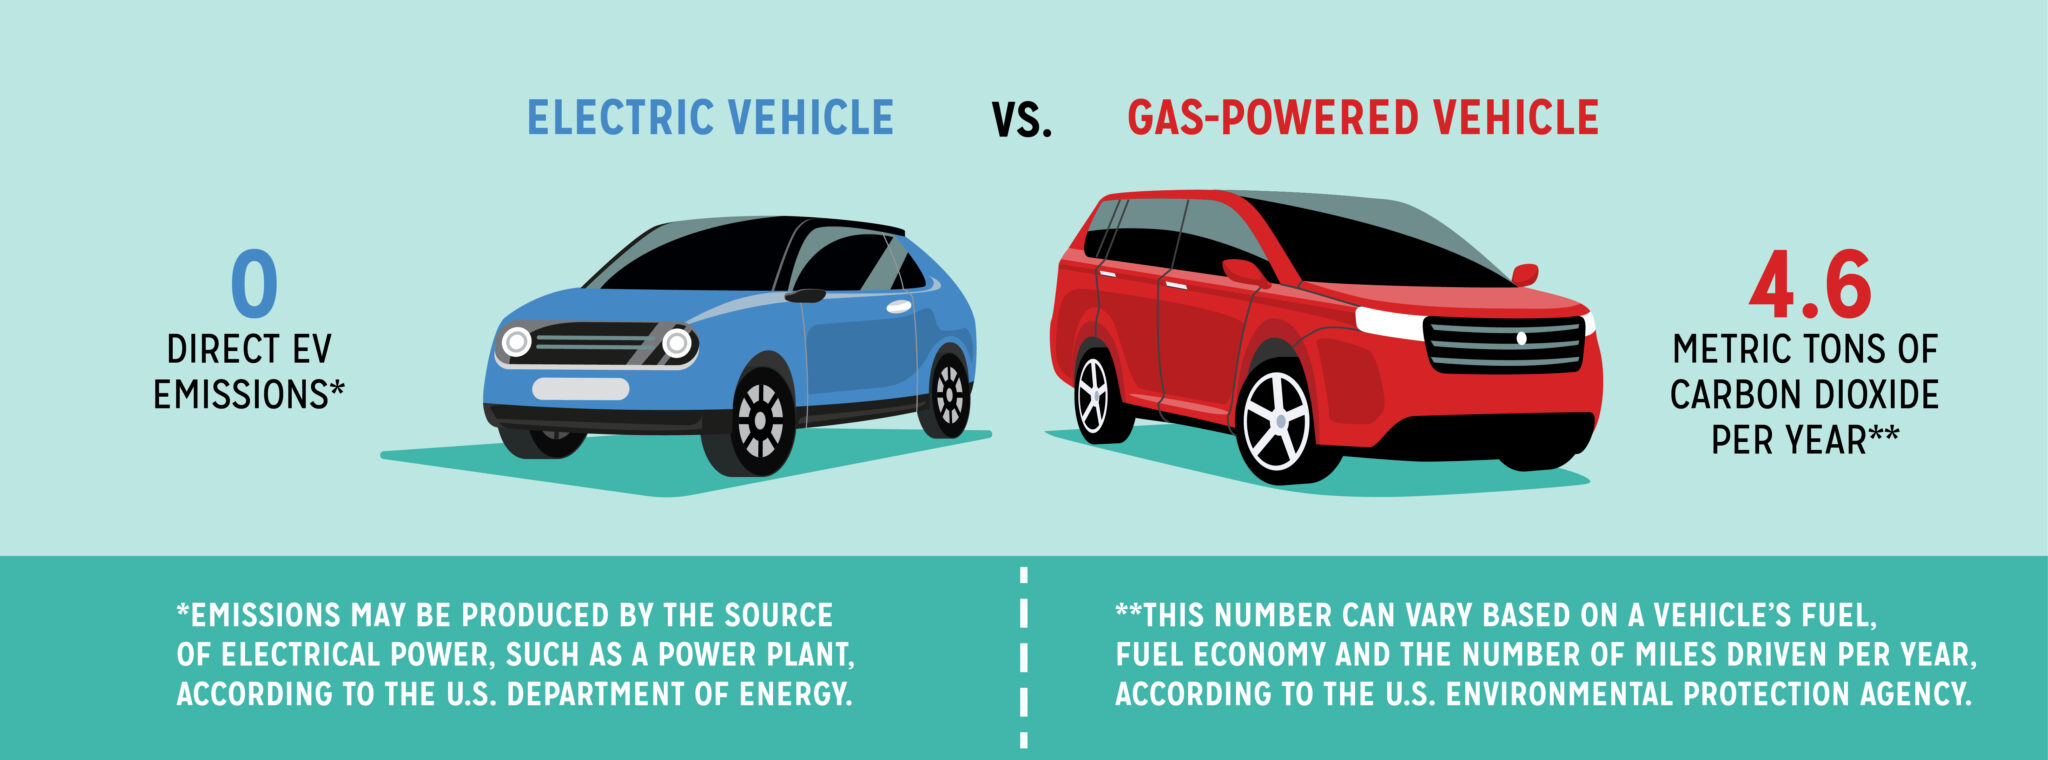 Infographic comparing electric vehicle emissions to gas-powered vehicle emissions